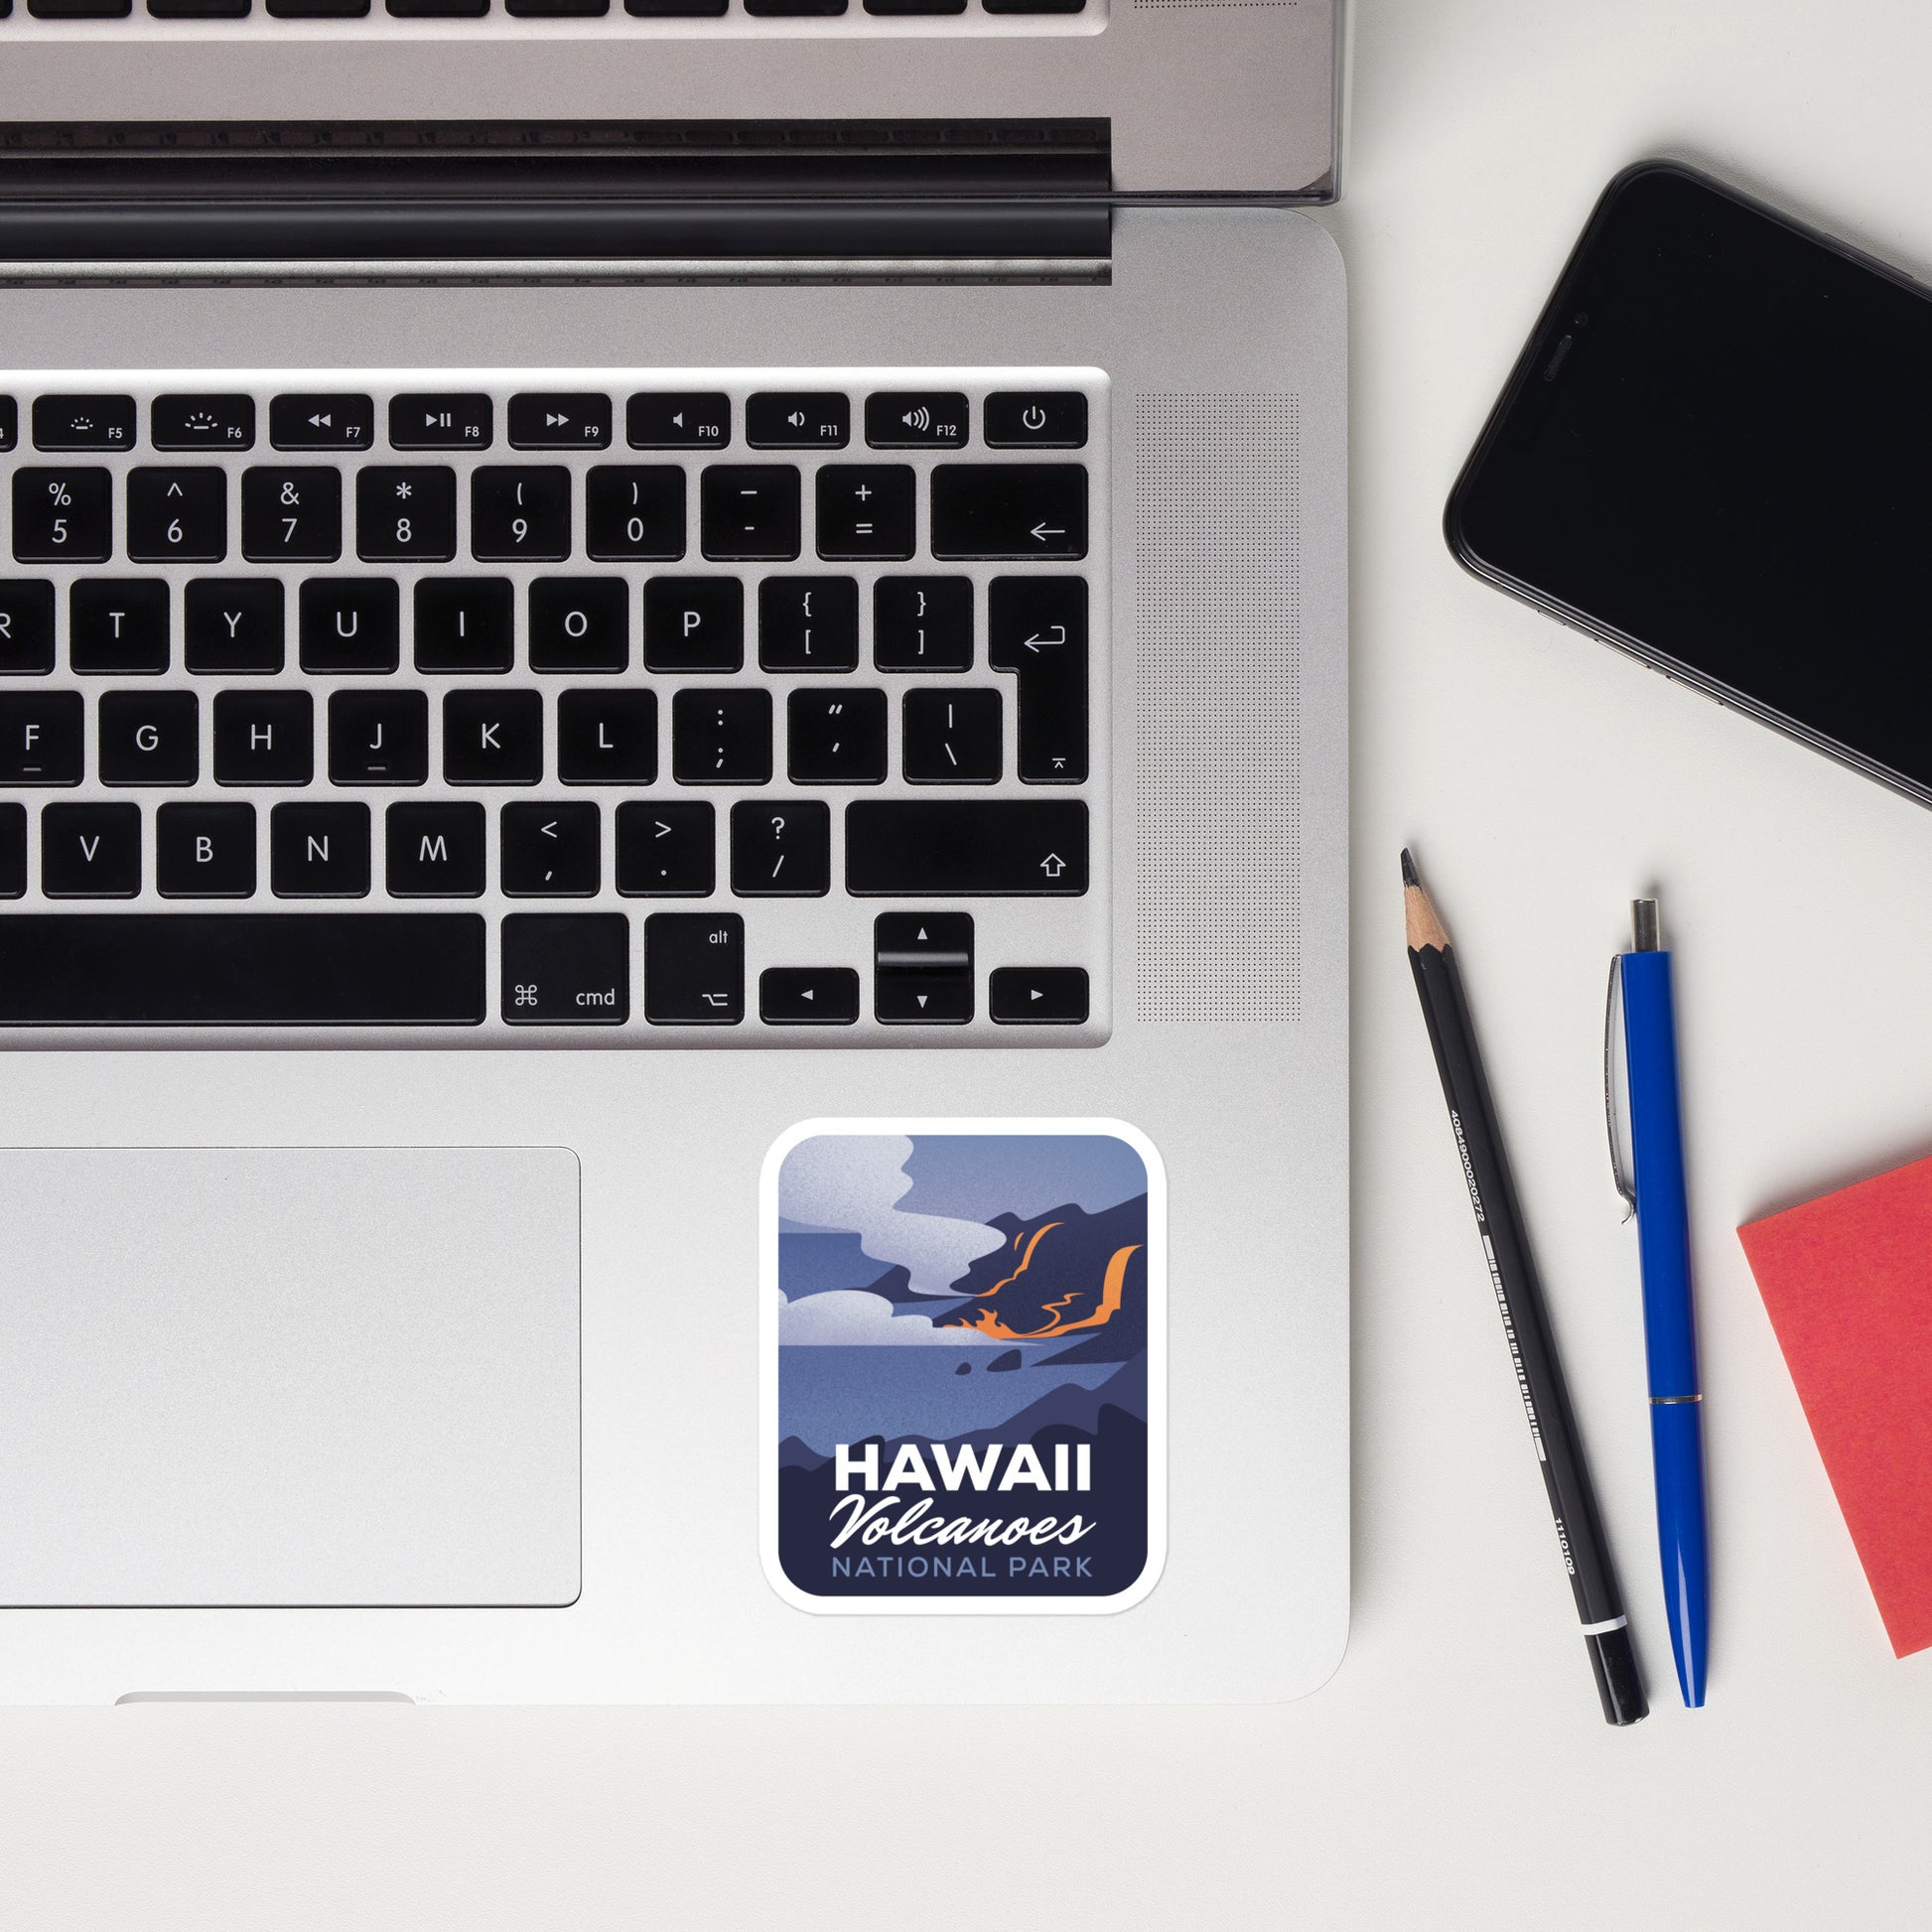 A sticker of Hawaii Volcanoes National Park on a laptop